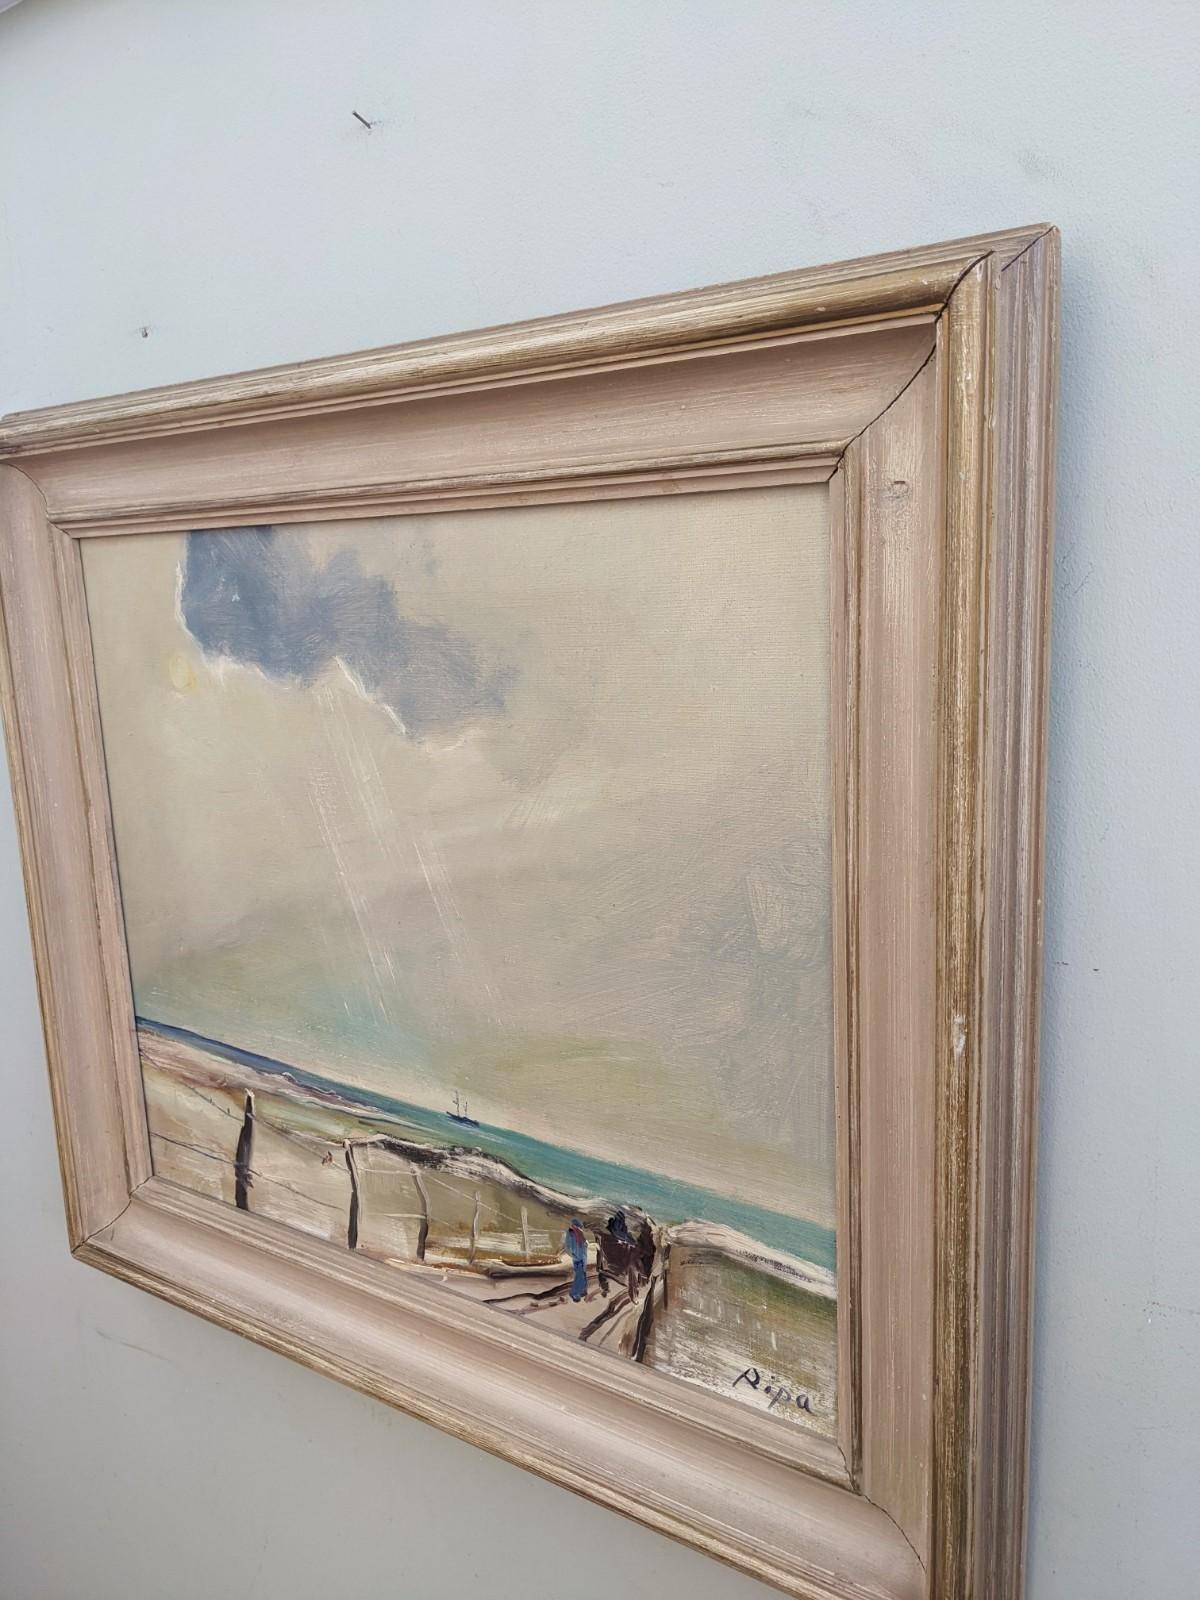 The Pier
Size: 62 x 71 cm (including frame)
Oil on canvas

A large mid century modernist coastalscape, painted in oil onto canvas.

In this composition we see a long pier heading out towards the sea, with the backs of a figure and horse cart walking